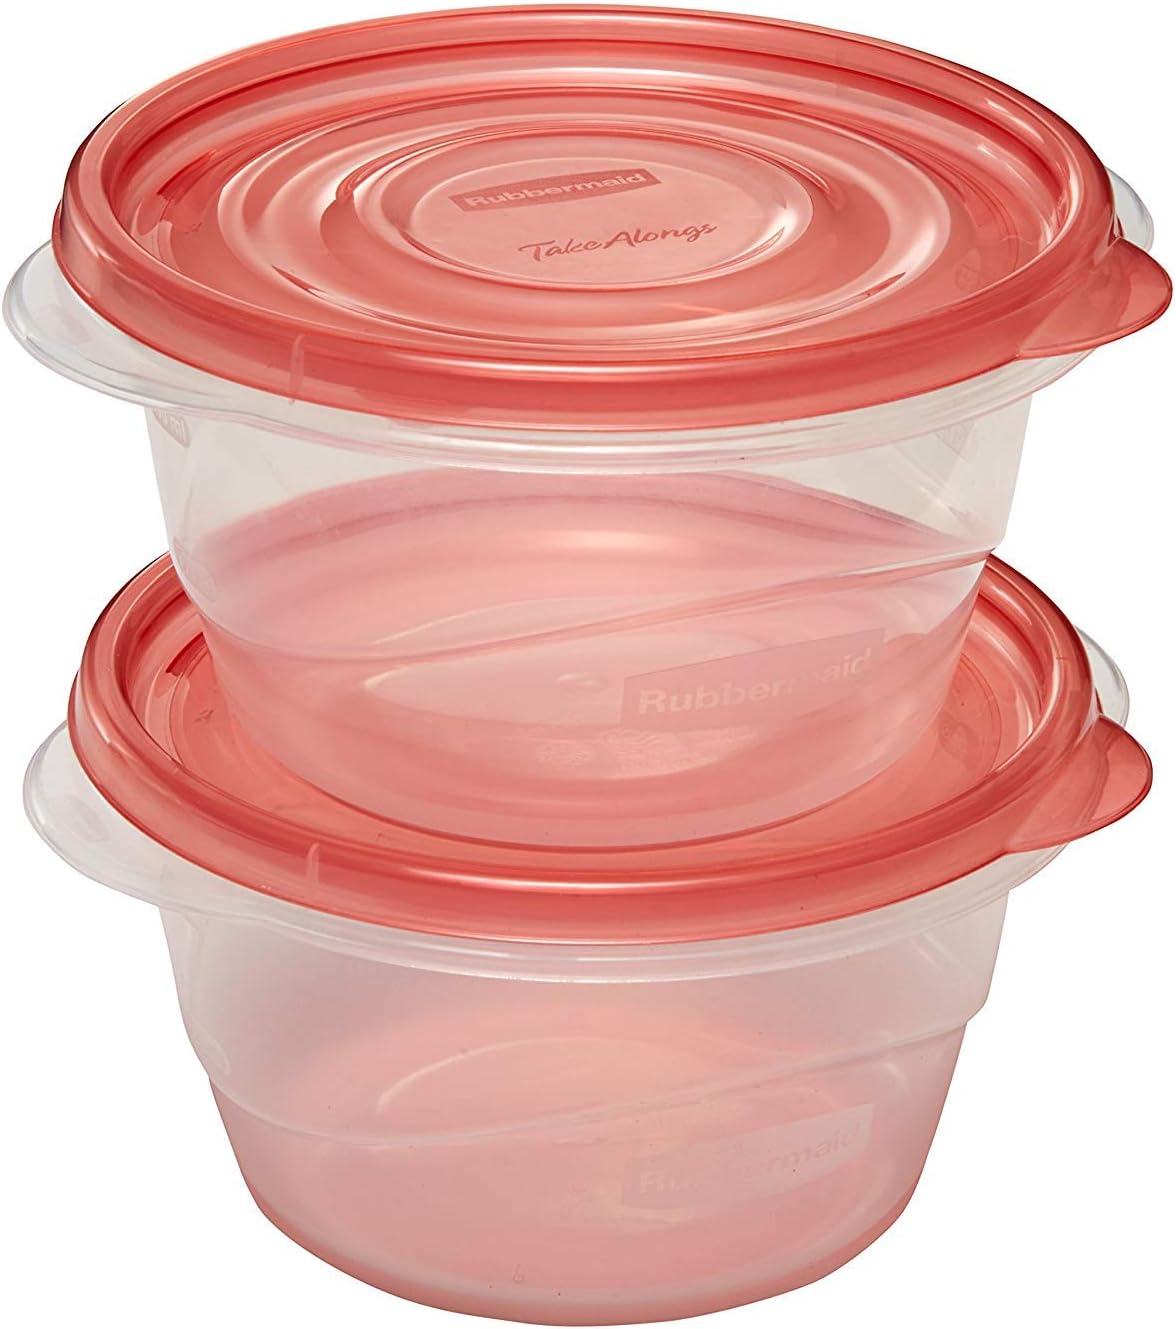 Rubbermaid  Small Bowl Food Storage Containers, 3.2 Cup